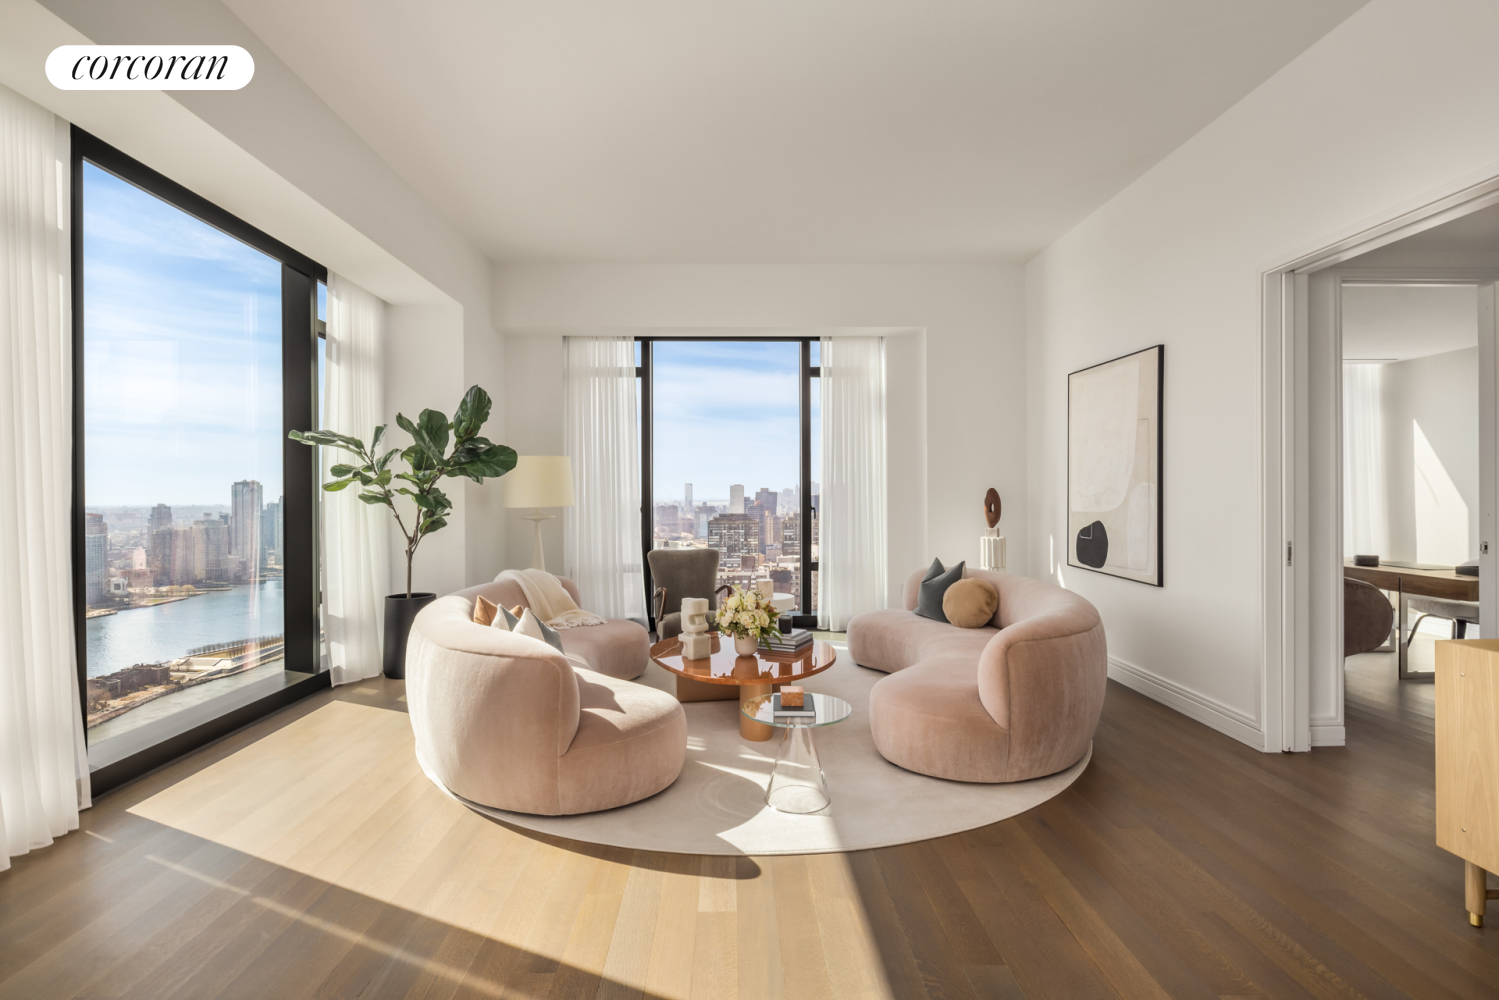 430 East 58th Street Ph70, Sutton, Midtown East, NYC - 4 Bedrooms  
4.5 Bathrooms  
13 Rooms - 